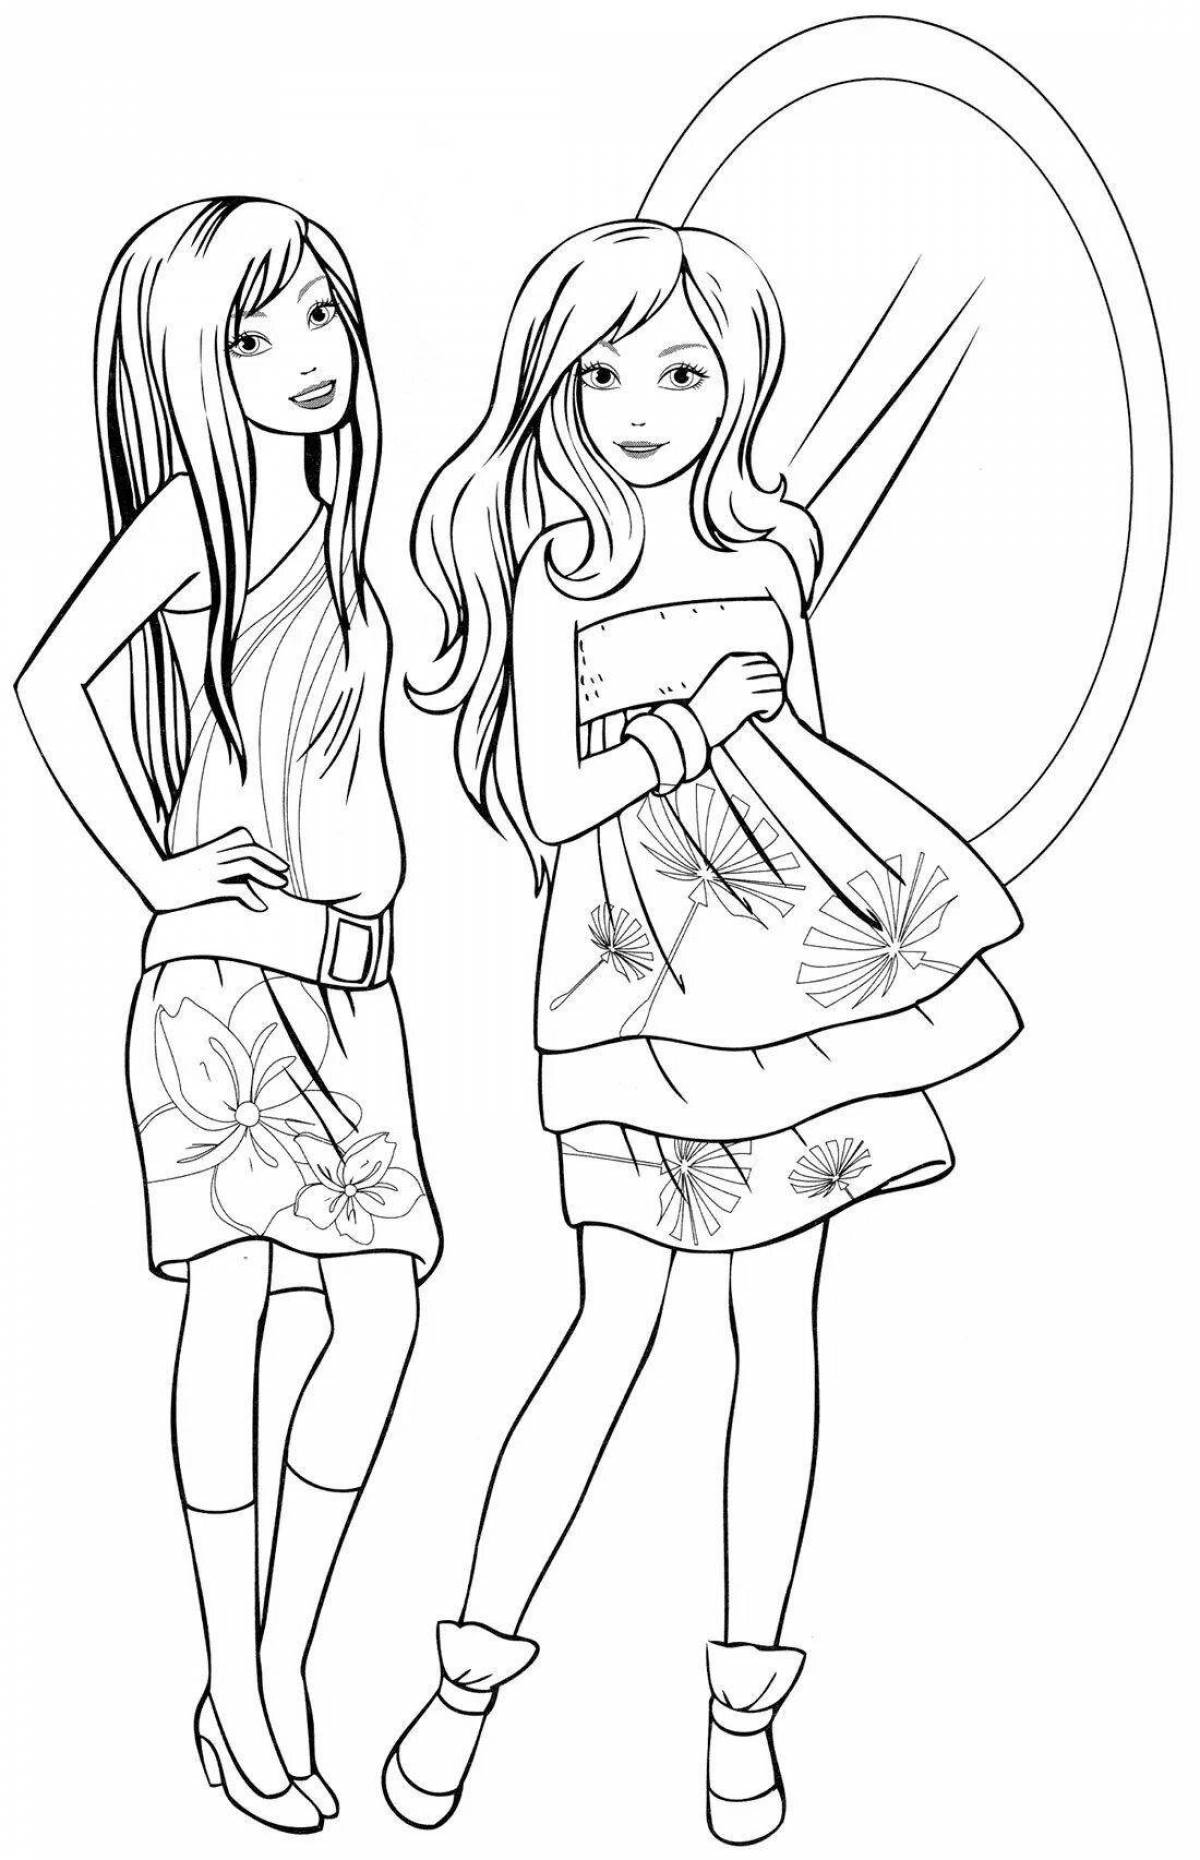 Coloring pages for girls 12 years old